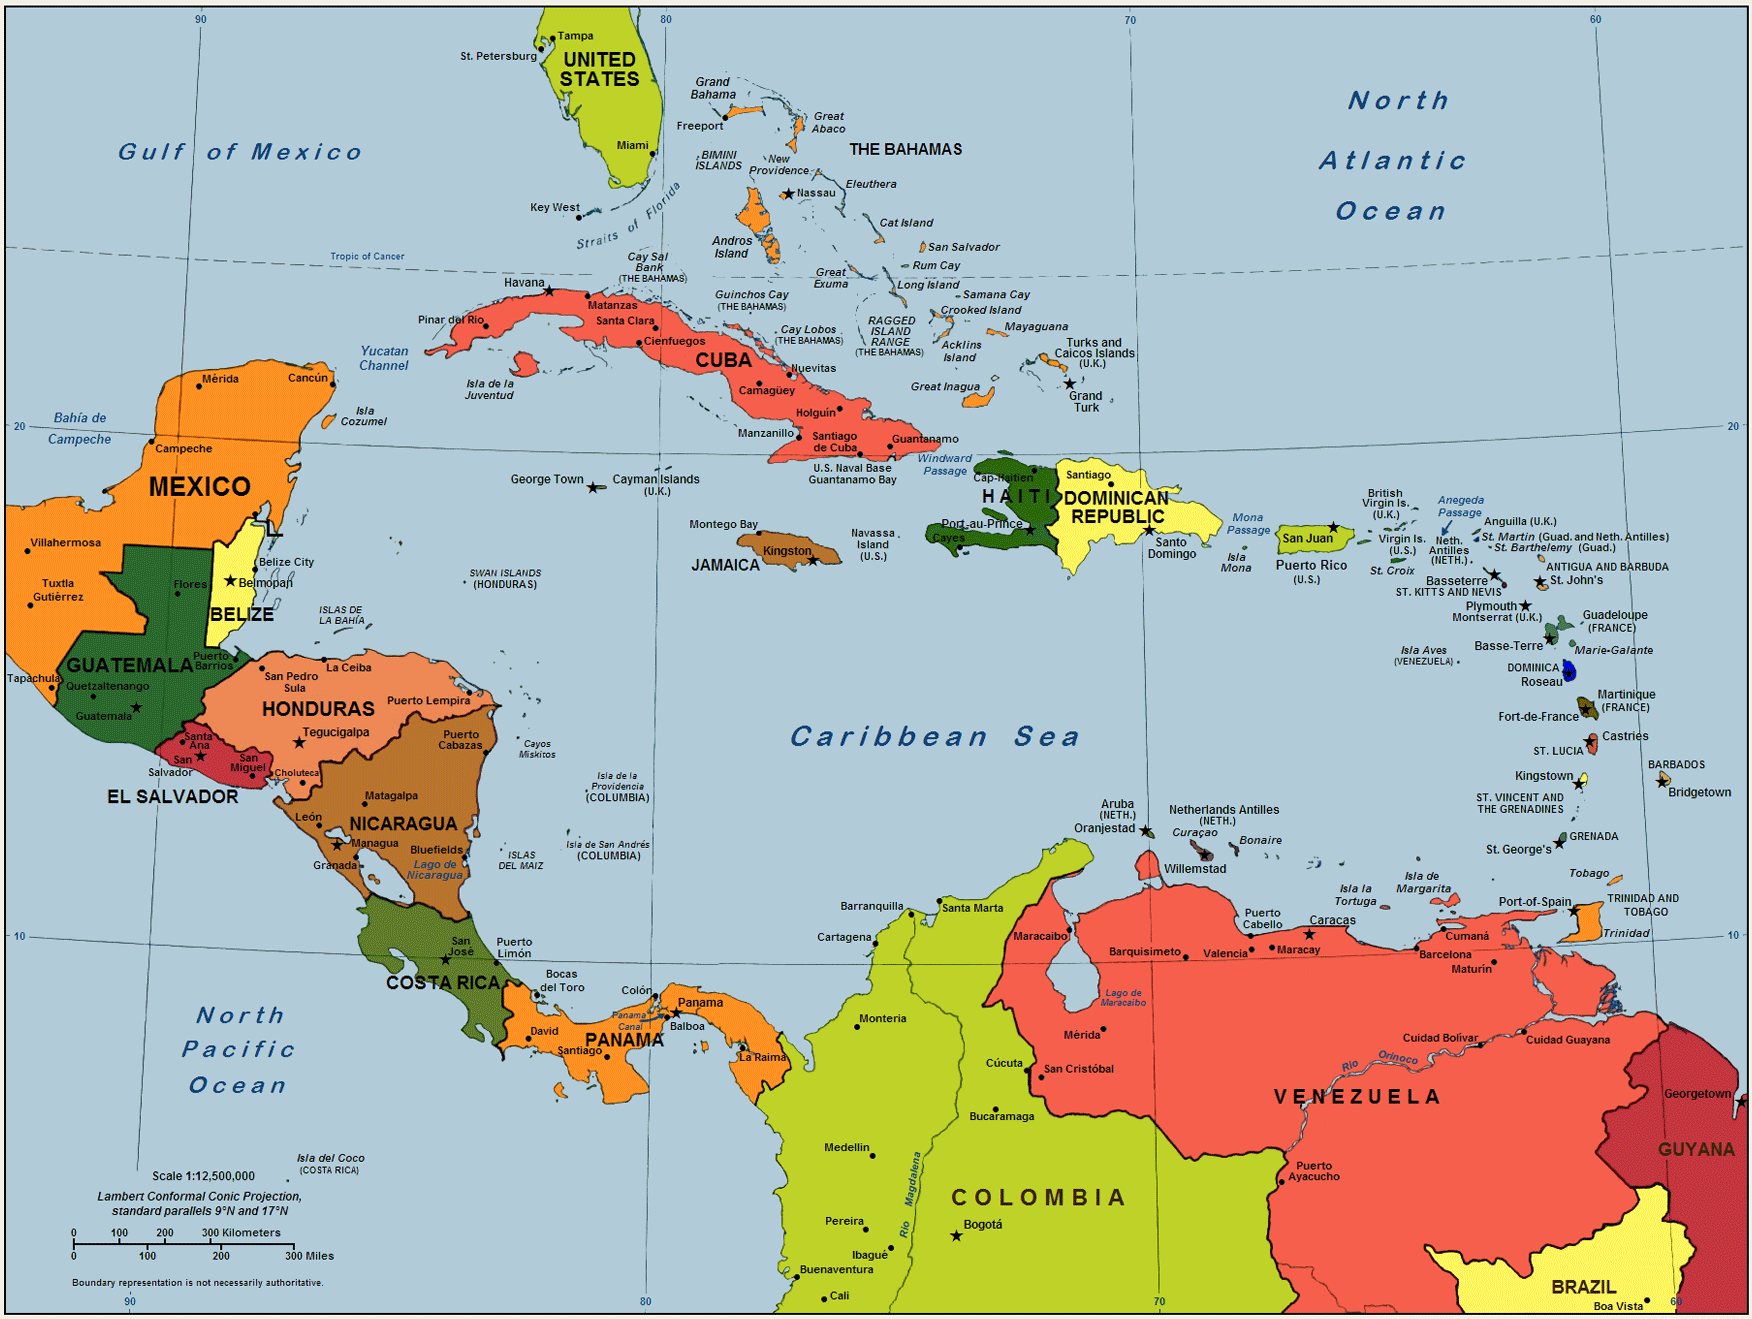 political-evolution-of-central-america-and-the-caribbean-caribbean